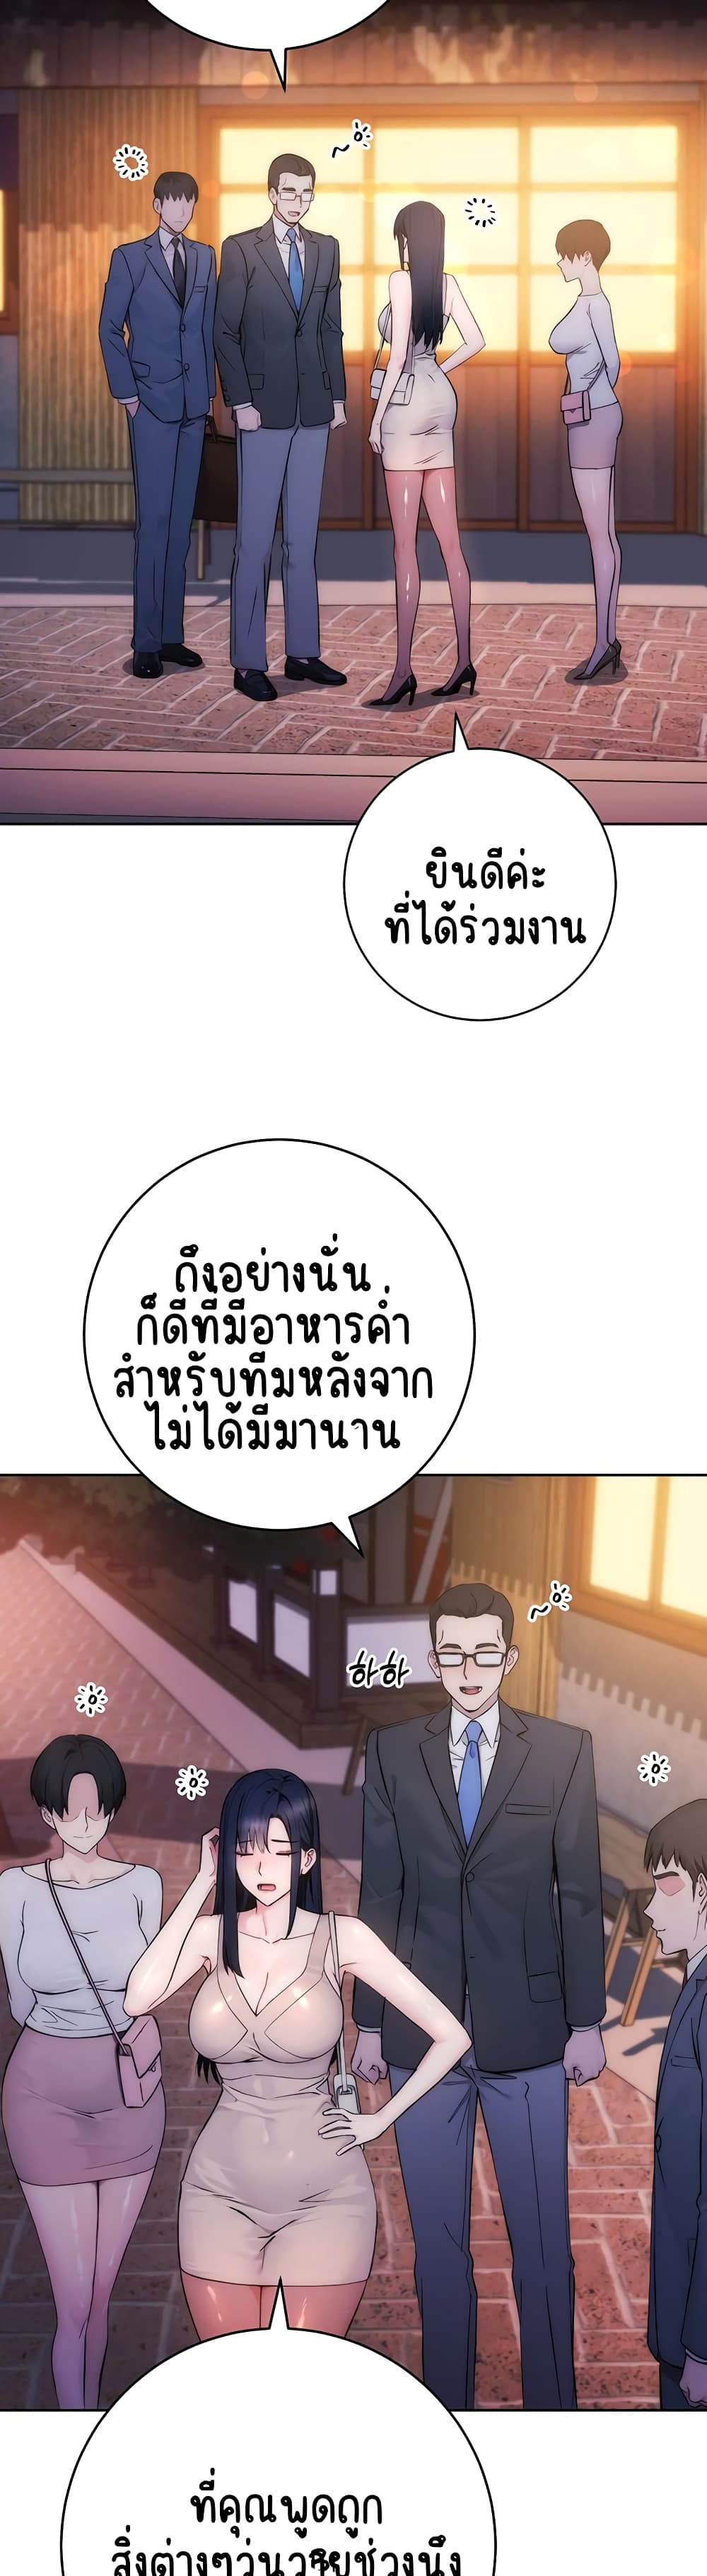 Outsider: The Invisible Man ตอนที่ 1 ภาพ 51